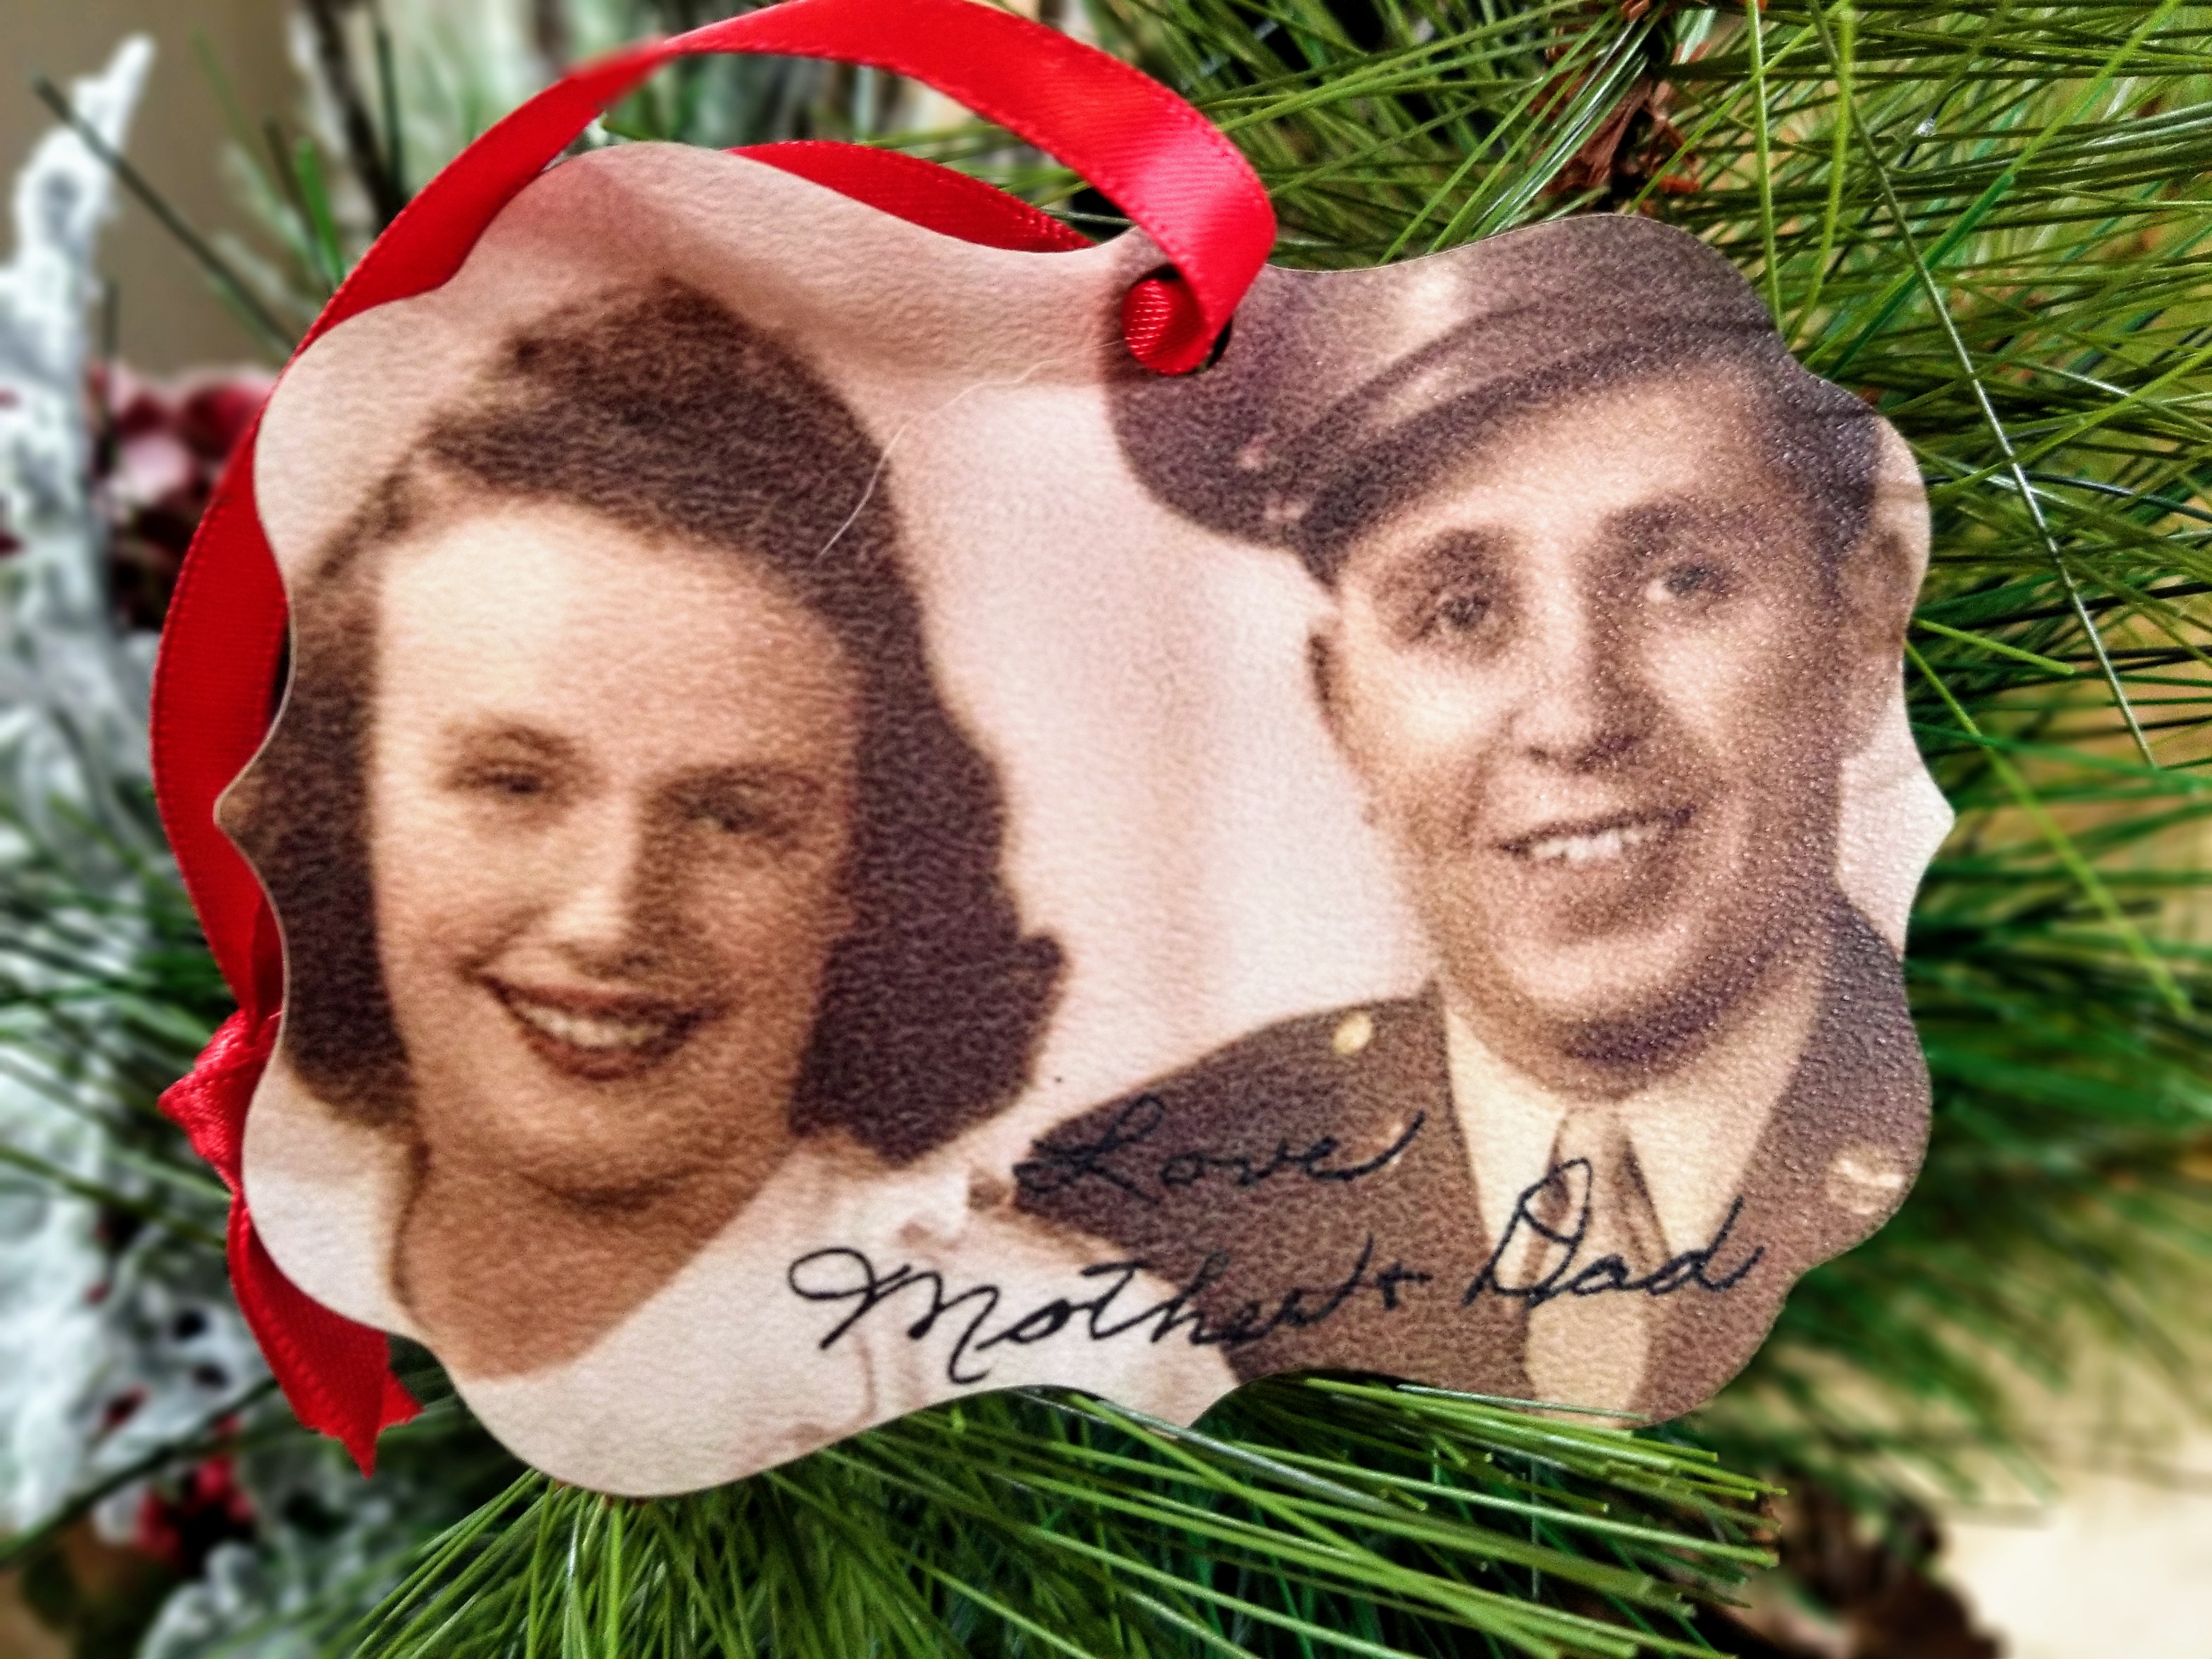 Christmas ornament with picture of loved ones and their handwriting added